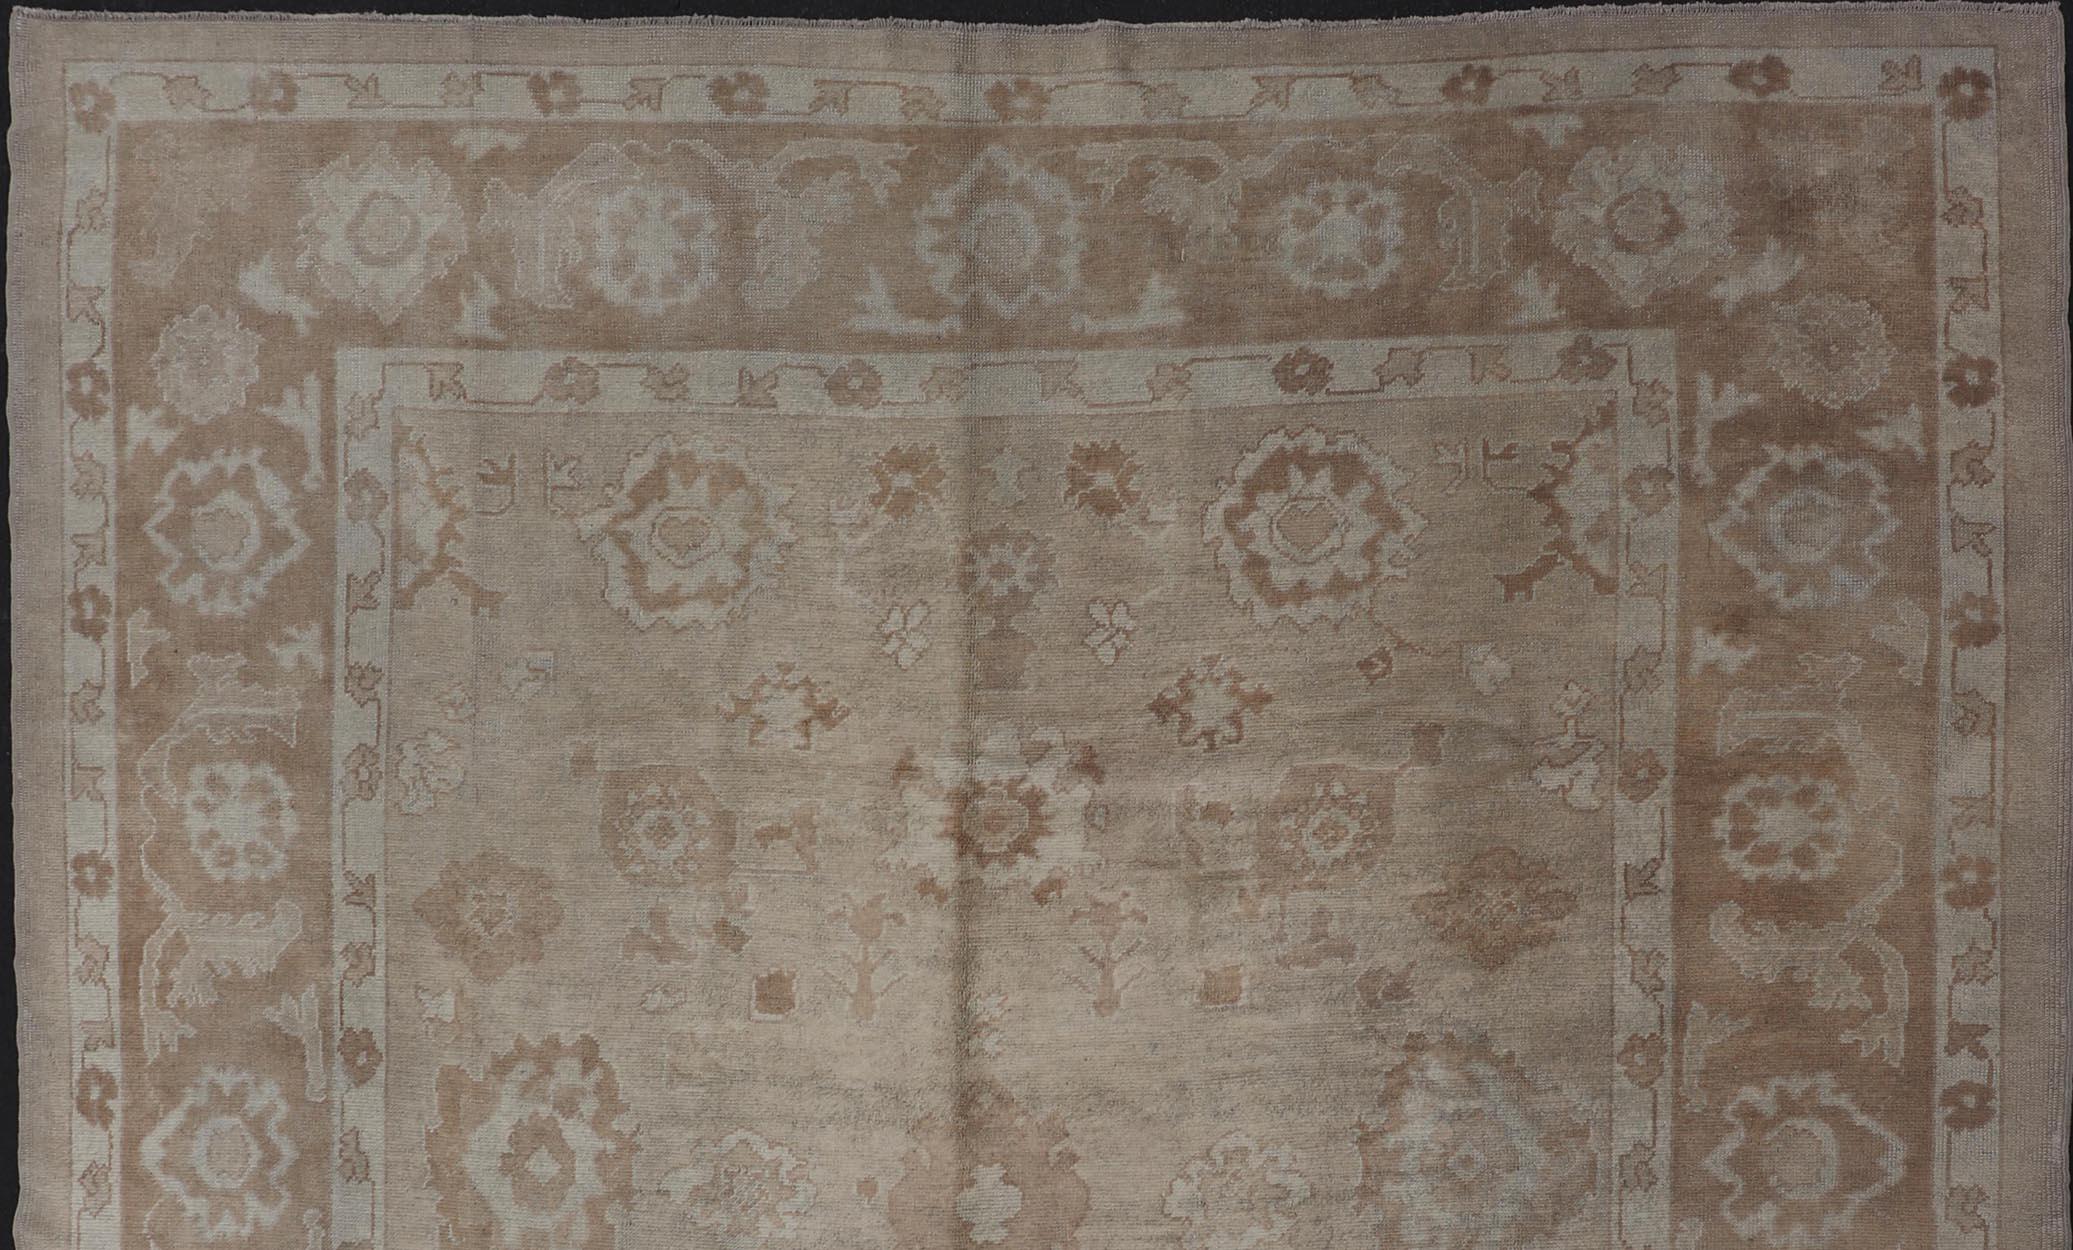 Vintage Turkish rug in light brown and cream Angora Oushak rug from Turkey, rug en-4573, country of origin / type: Turkey / Angora Oushak

This wonderful piece is made with a combination of angora and old wool. Featuring all organic materials,